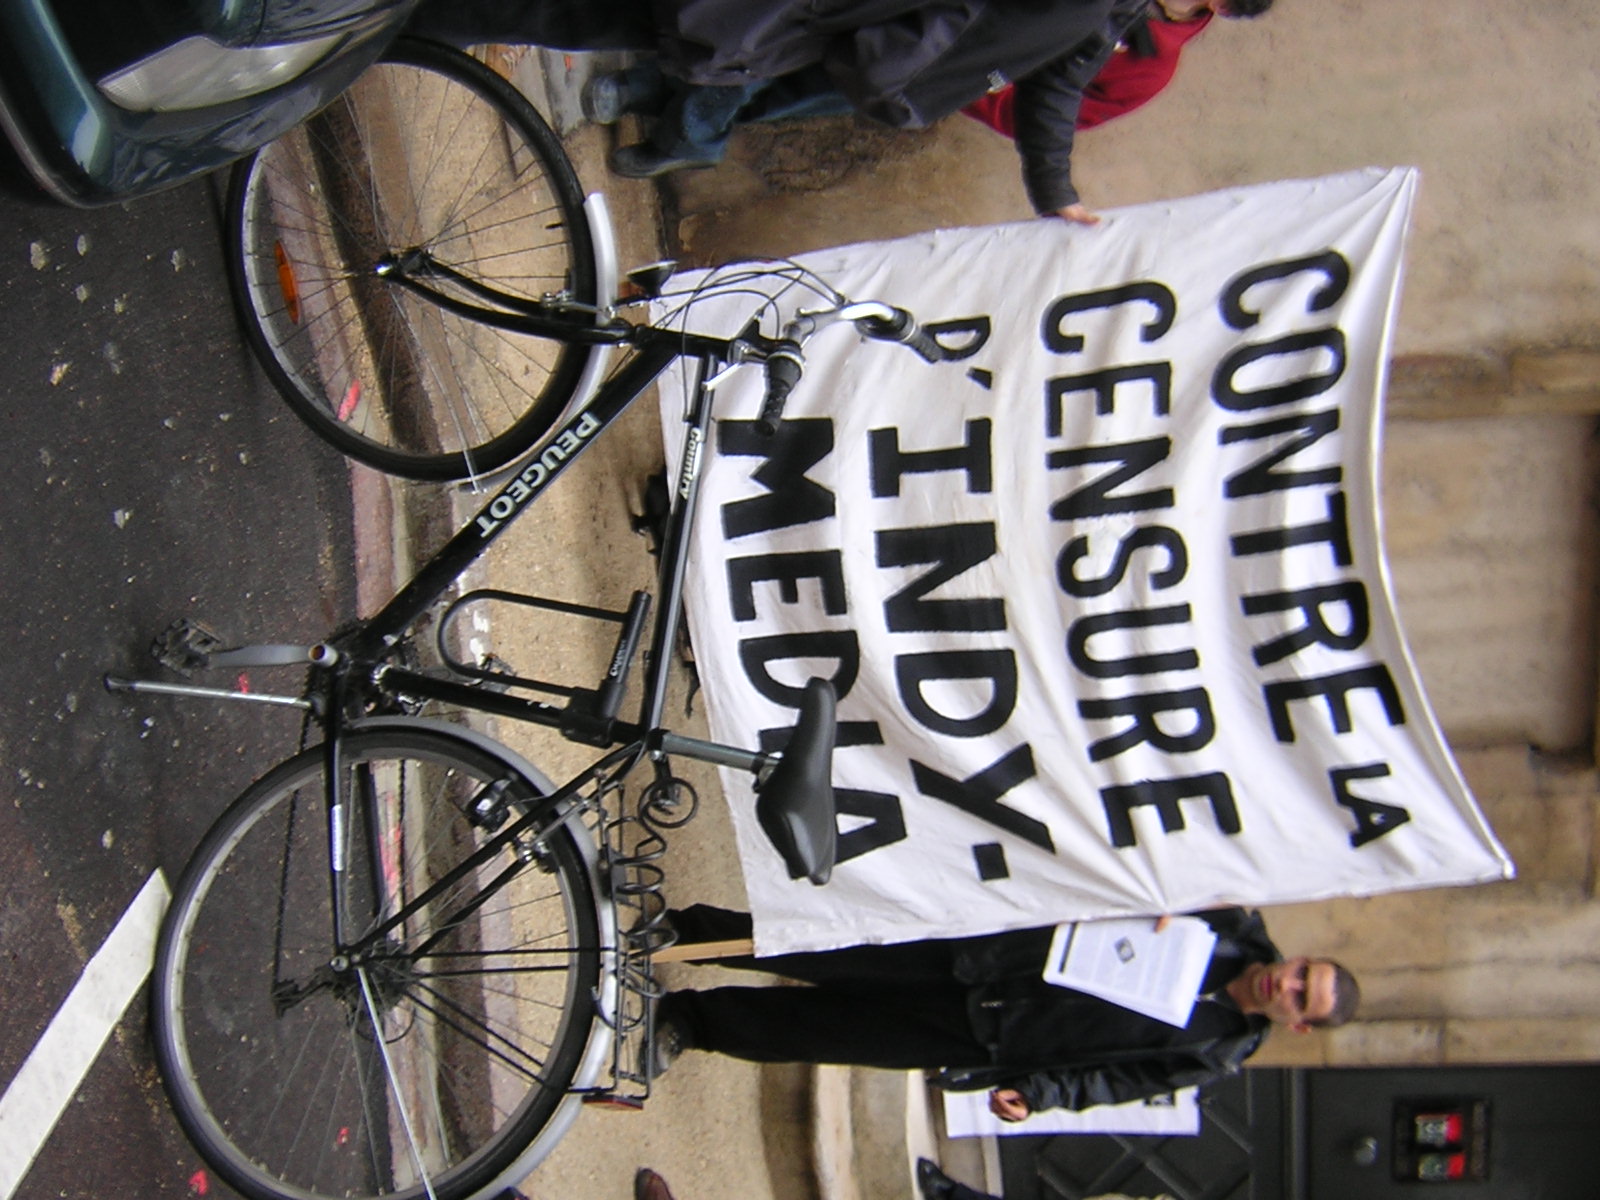 banner: "against the censorship of indymedia"